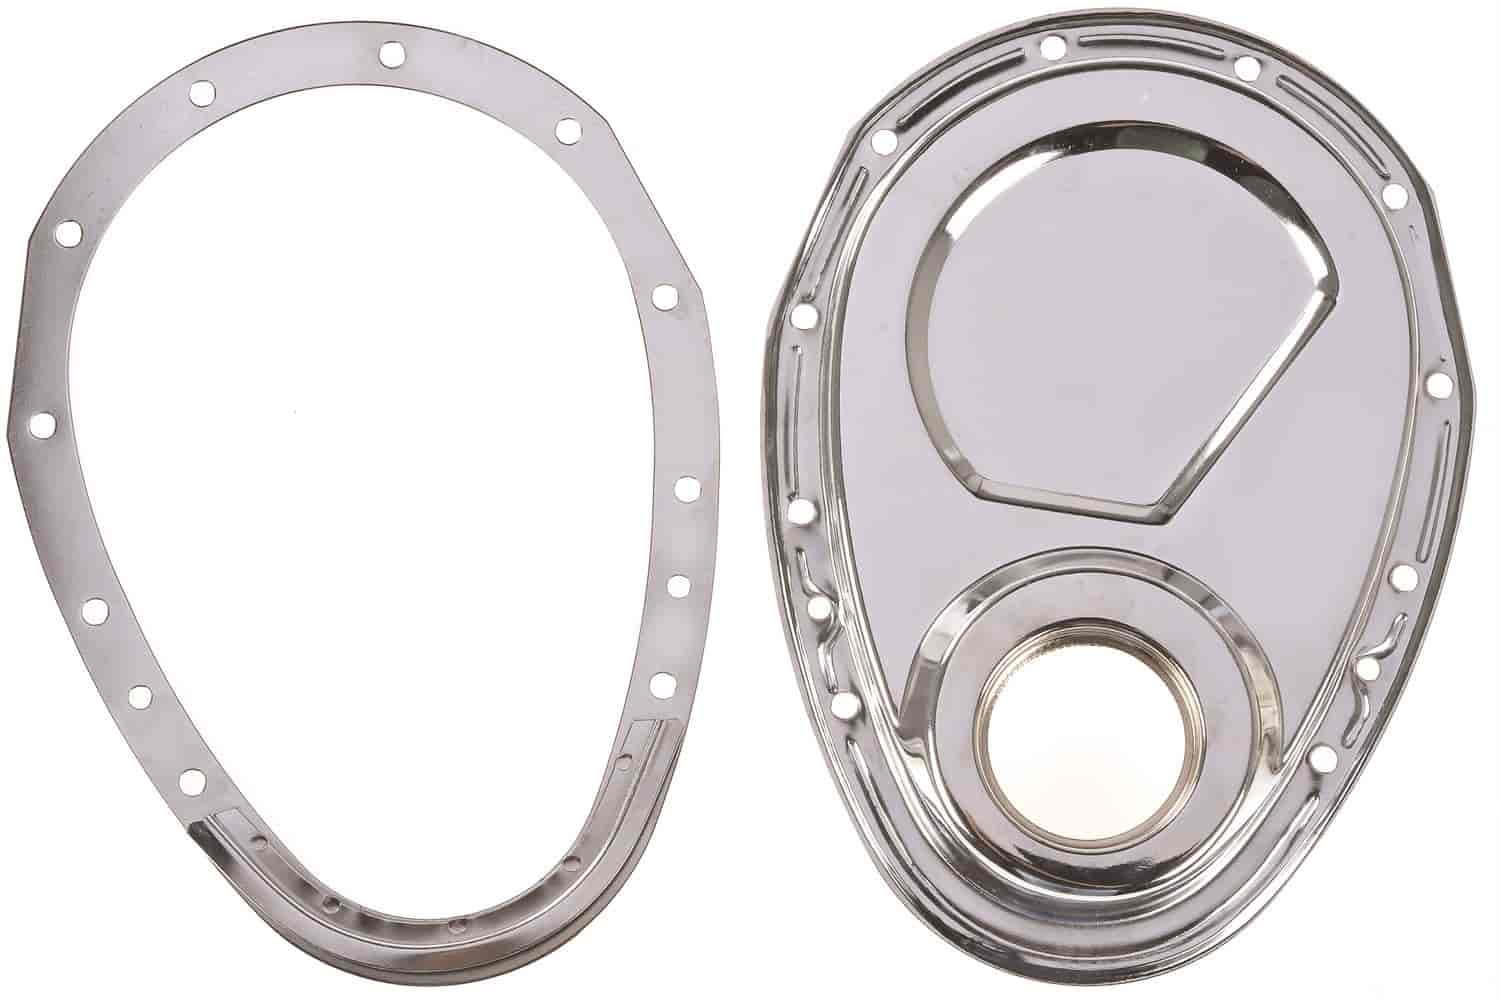 Timing Cover Kit for 1955-1986 Small Block Chevy & 90-degree V6